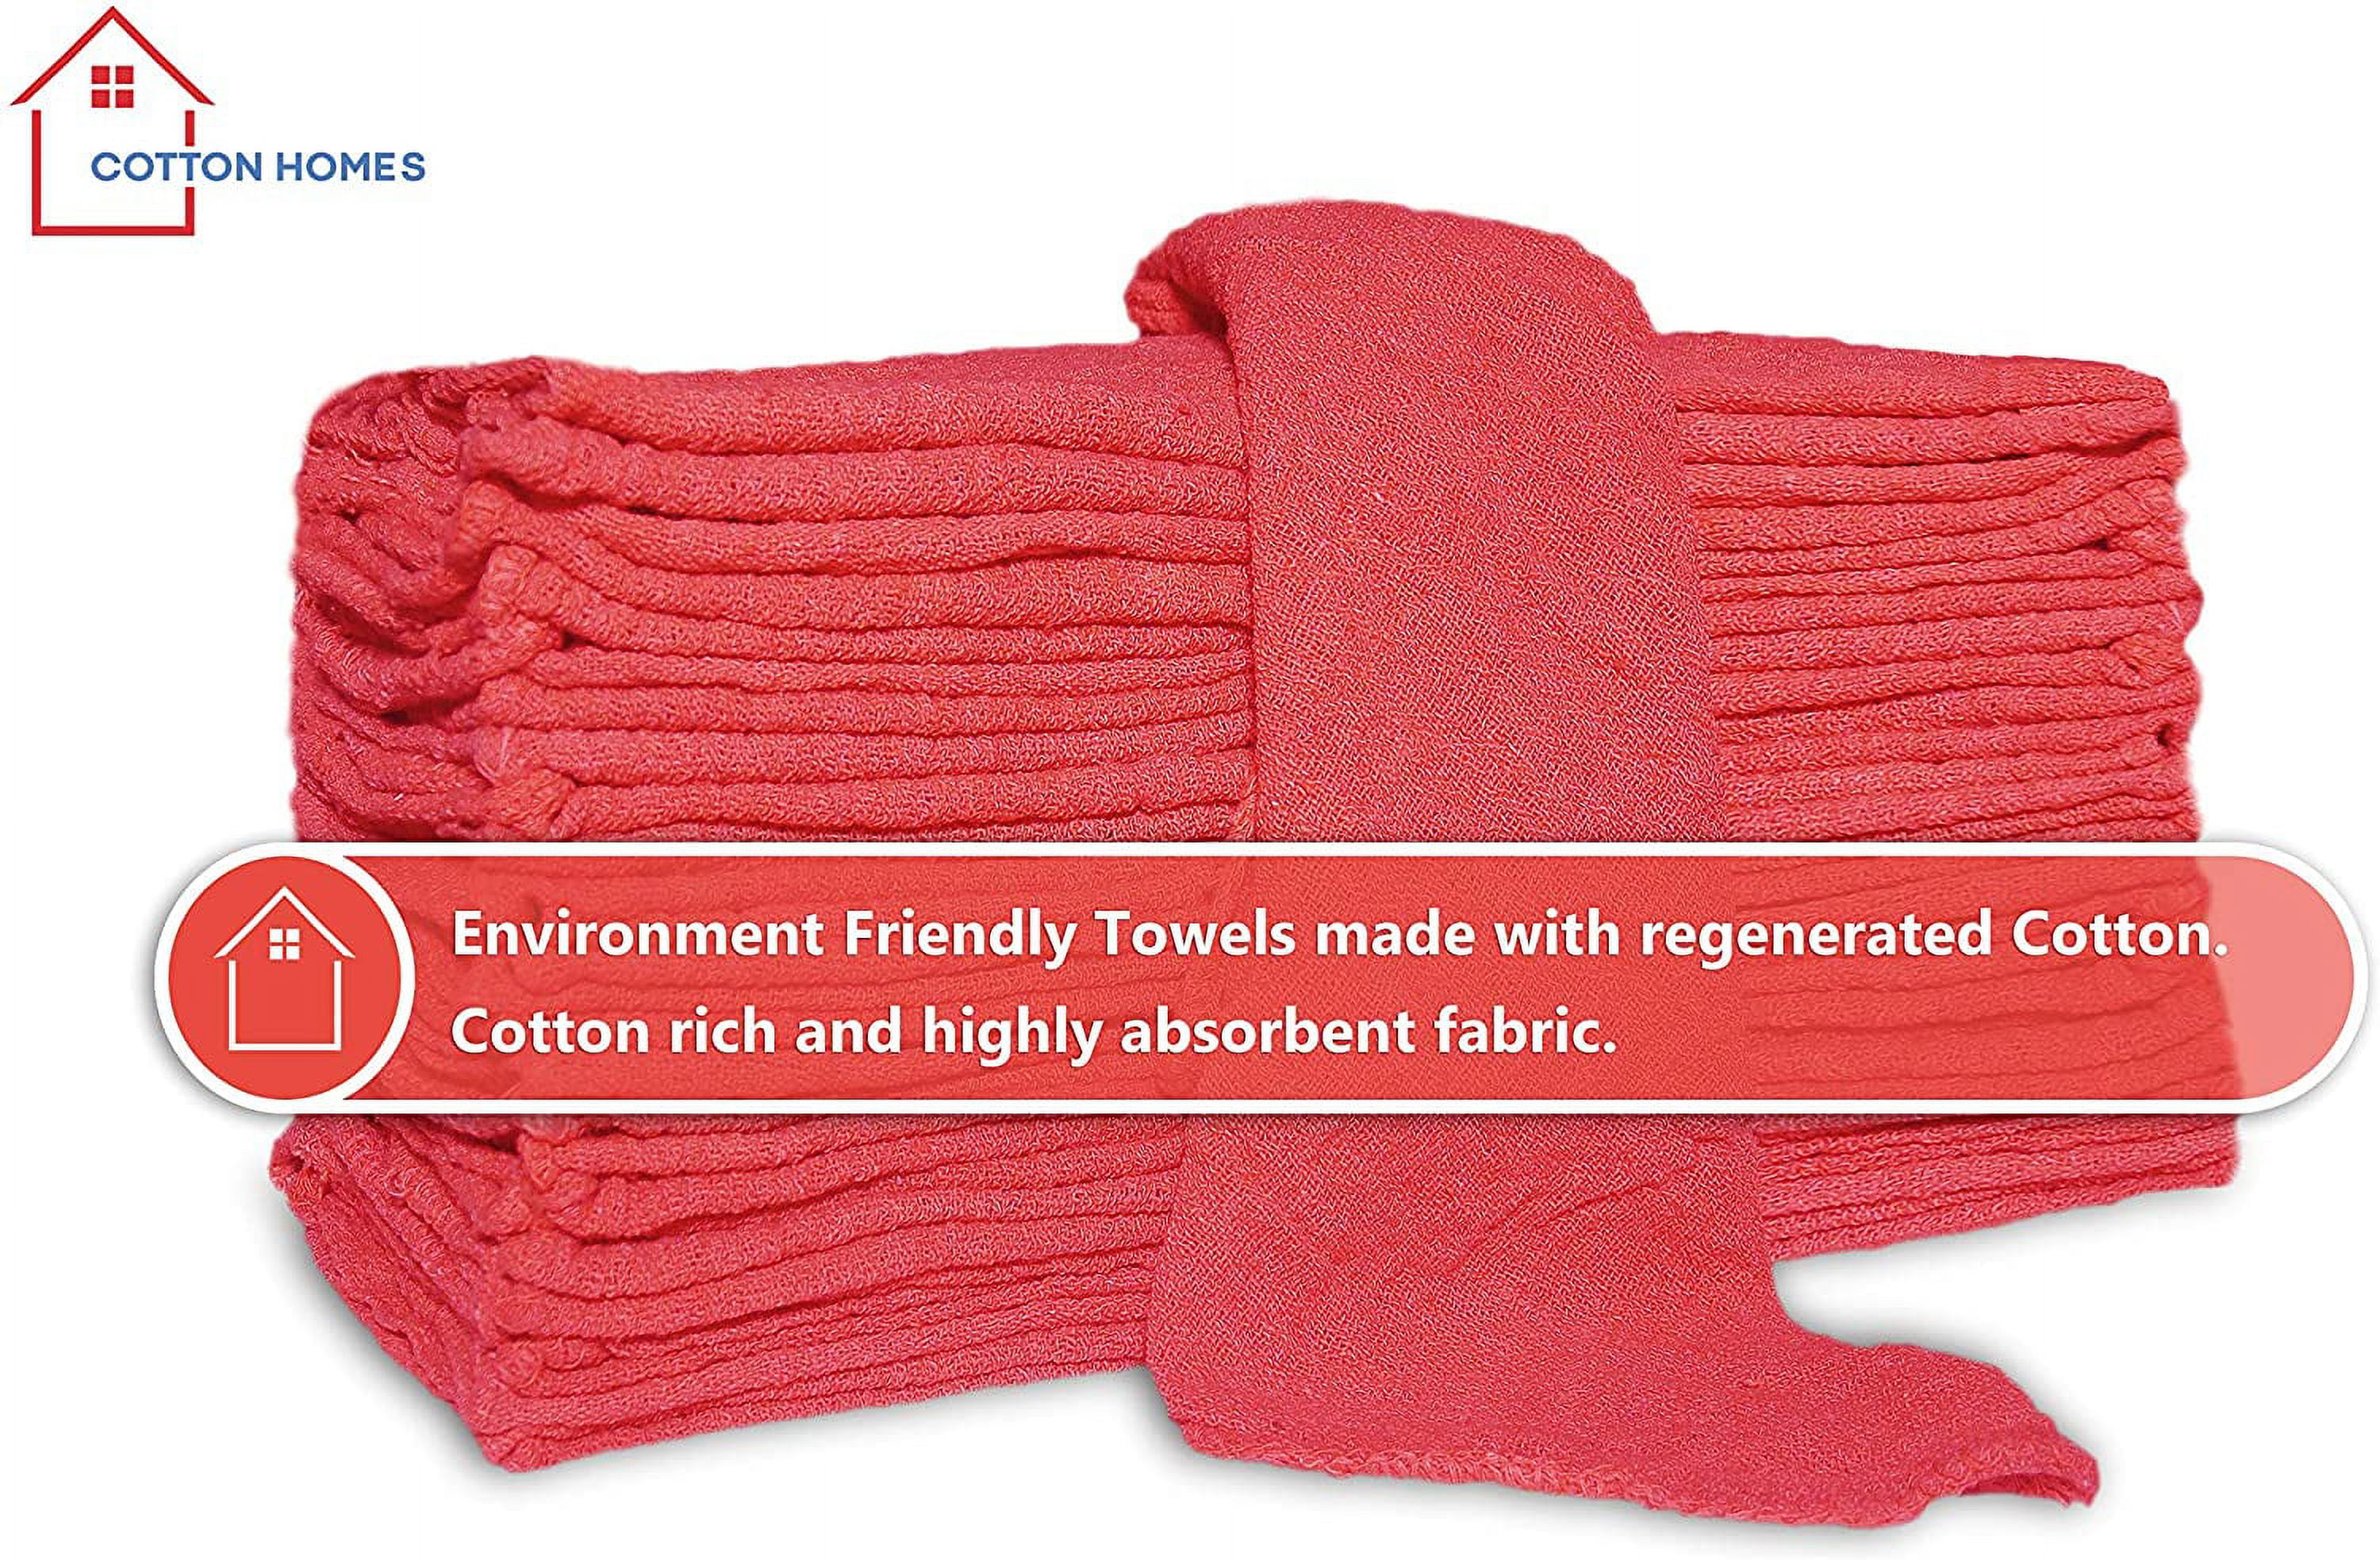 Cotton Homes 500Pc Shop Towels Rags Bulk– 12 x12 Inch- Regenerated Cotton  Multipurpose Cleaning towels, Paint Cloth, Bar Towels- Prewashed and